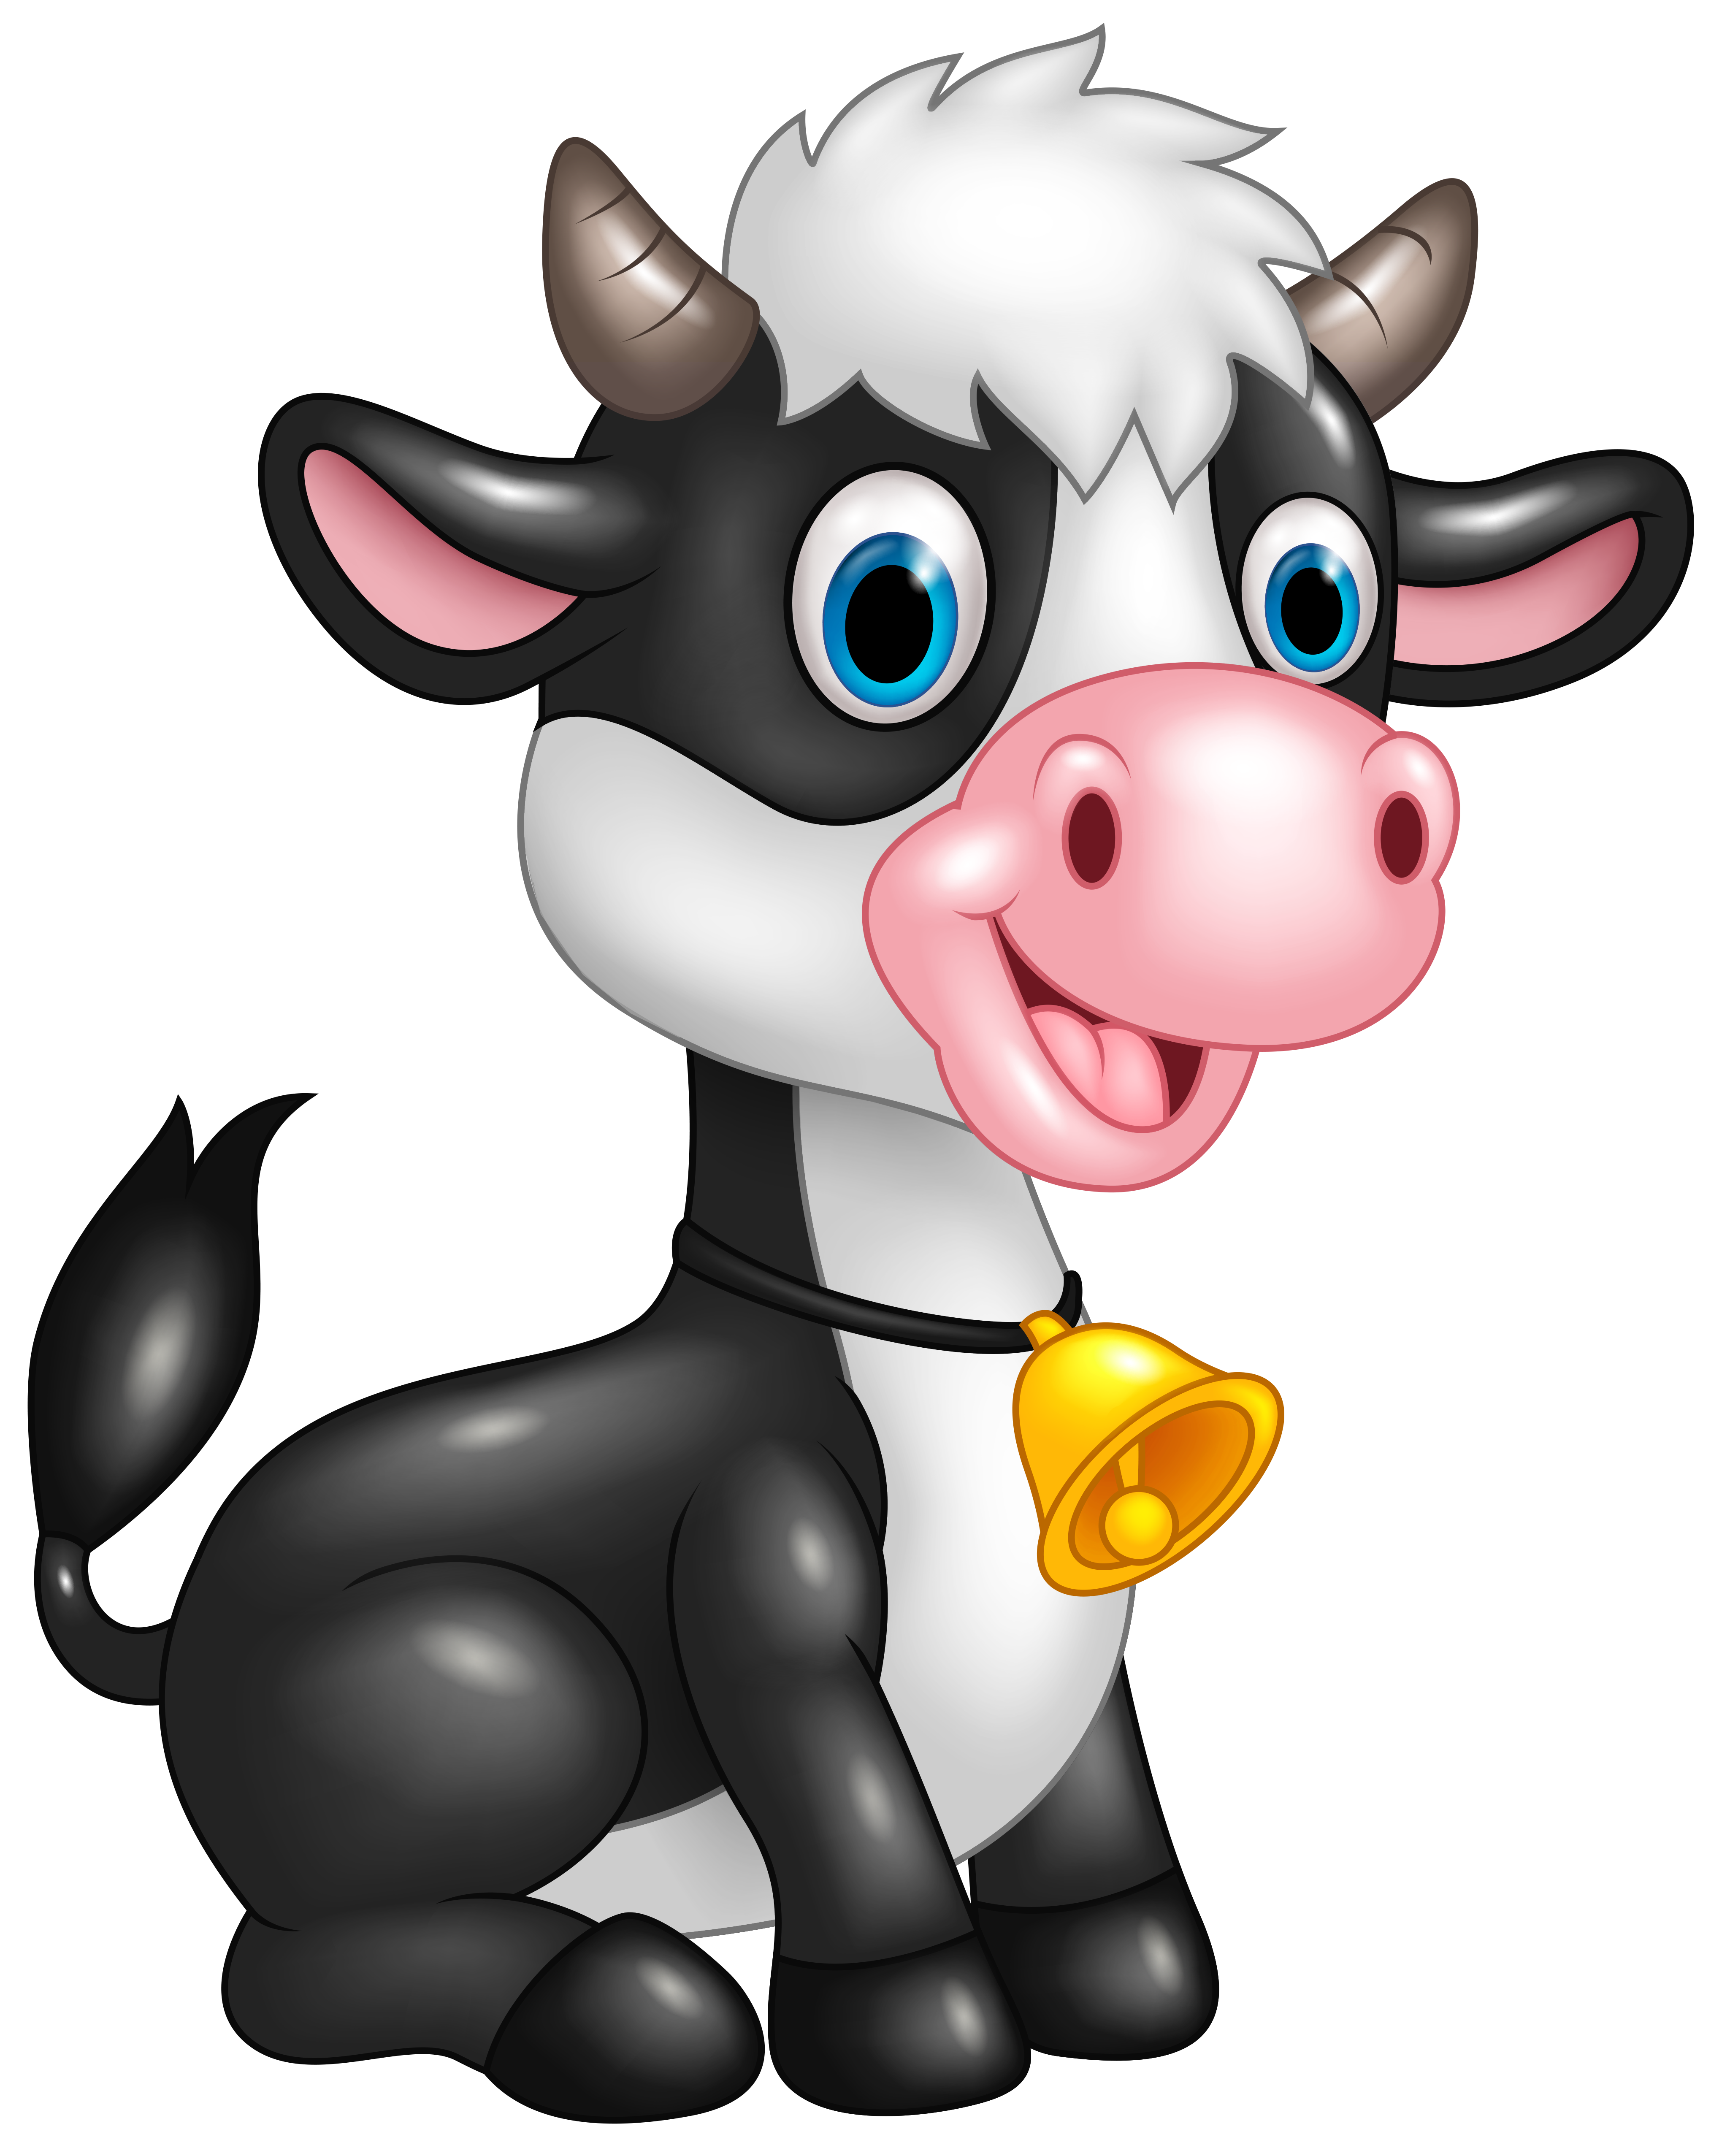 Cute Cow Cartoon PNG Clipart Image​ | Gallery Yopriceville - High-Quality  Free Images and Transparent PNG Clipart